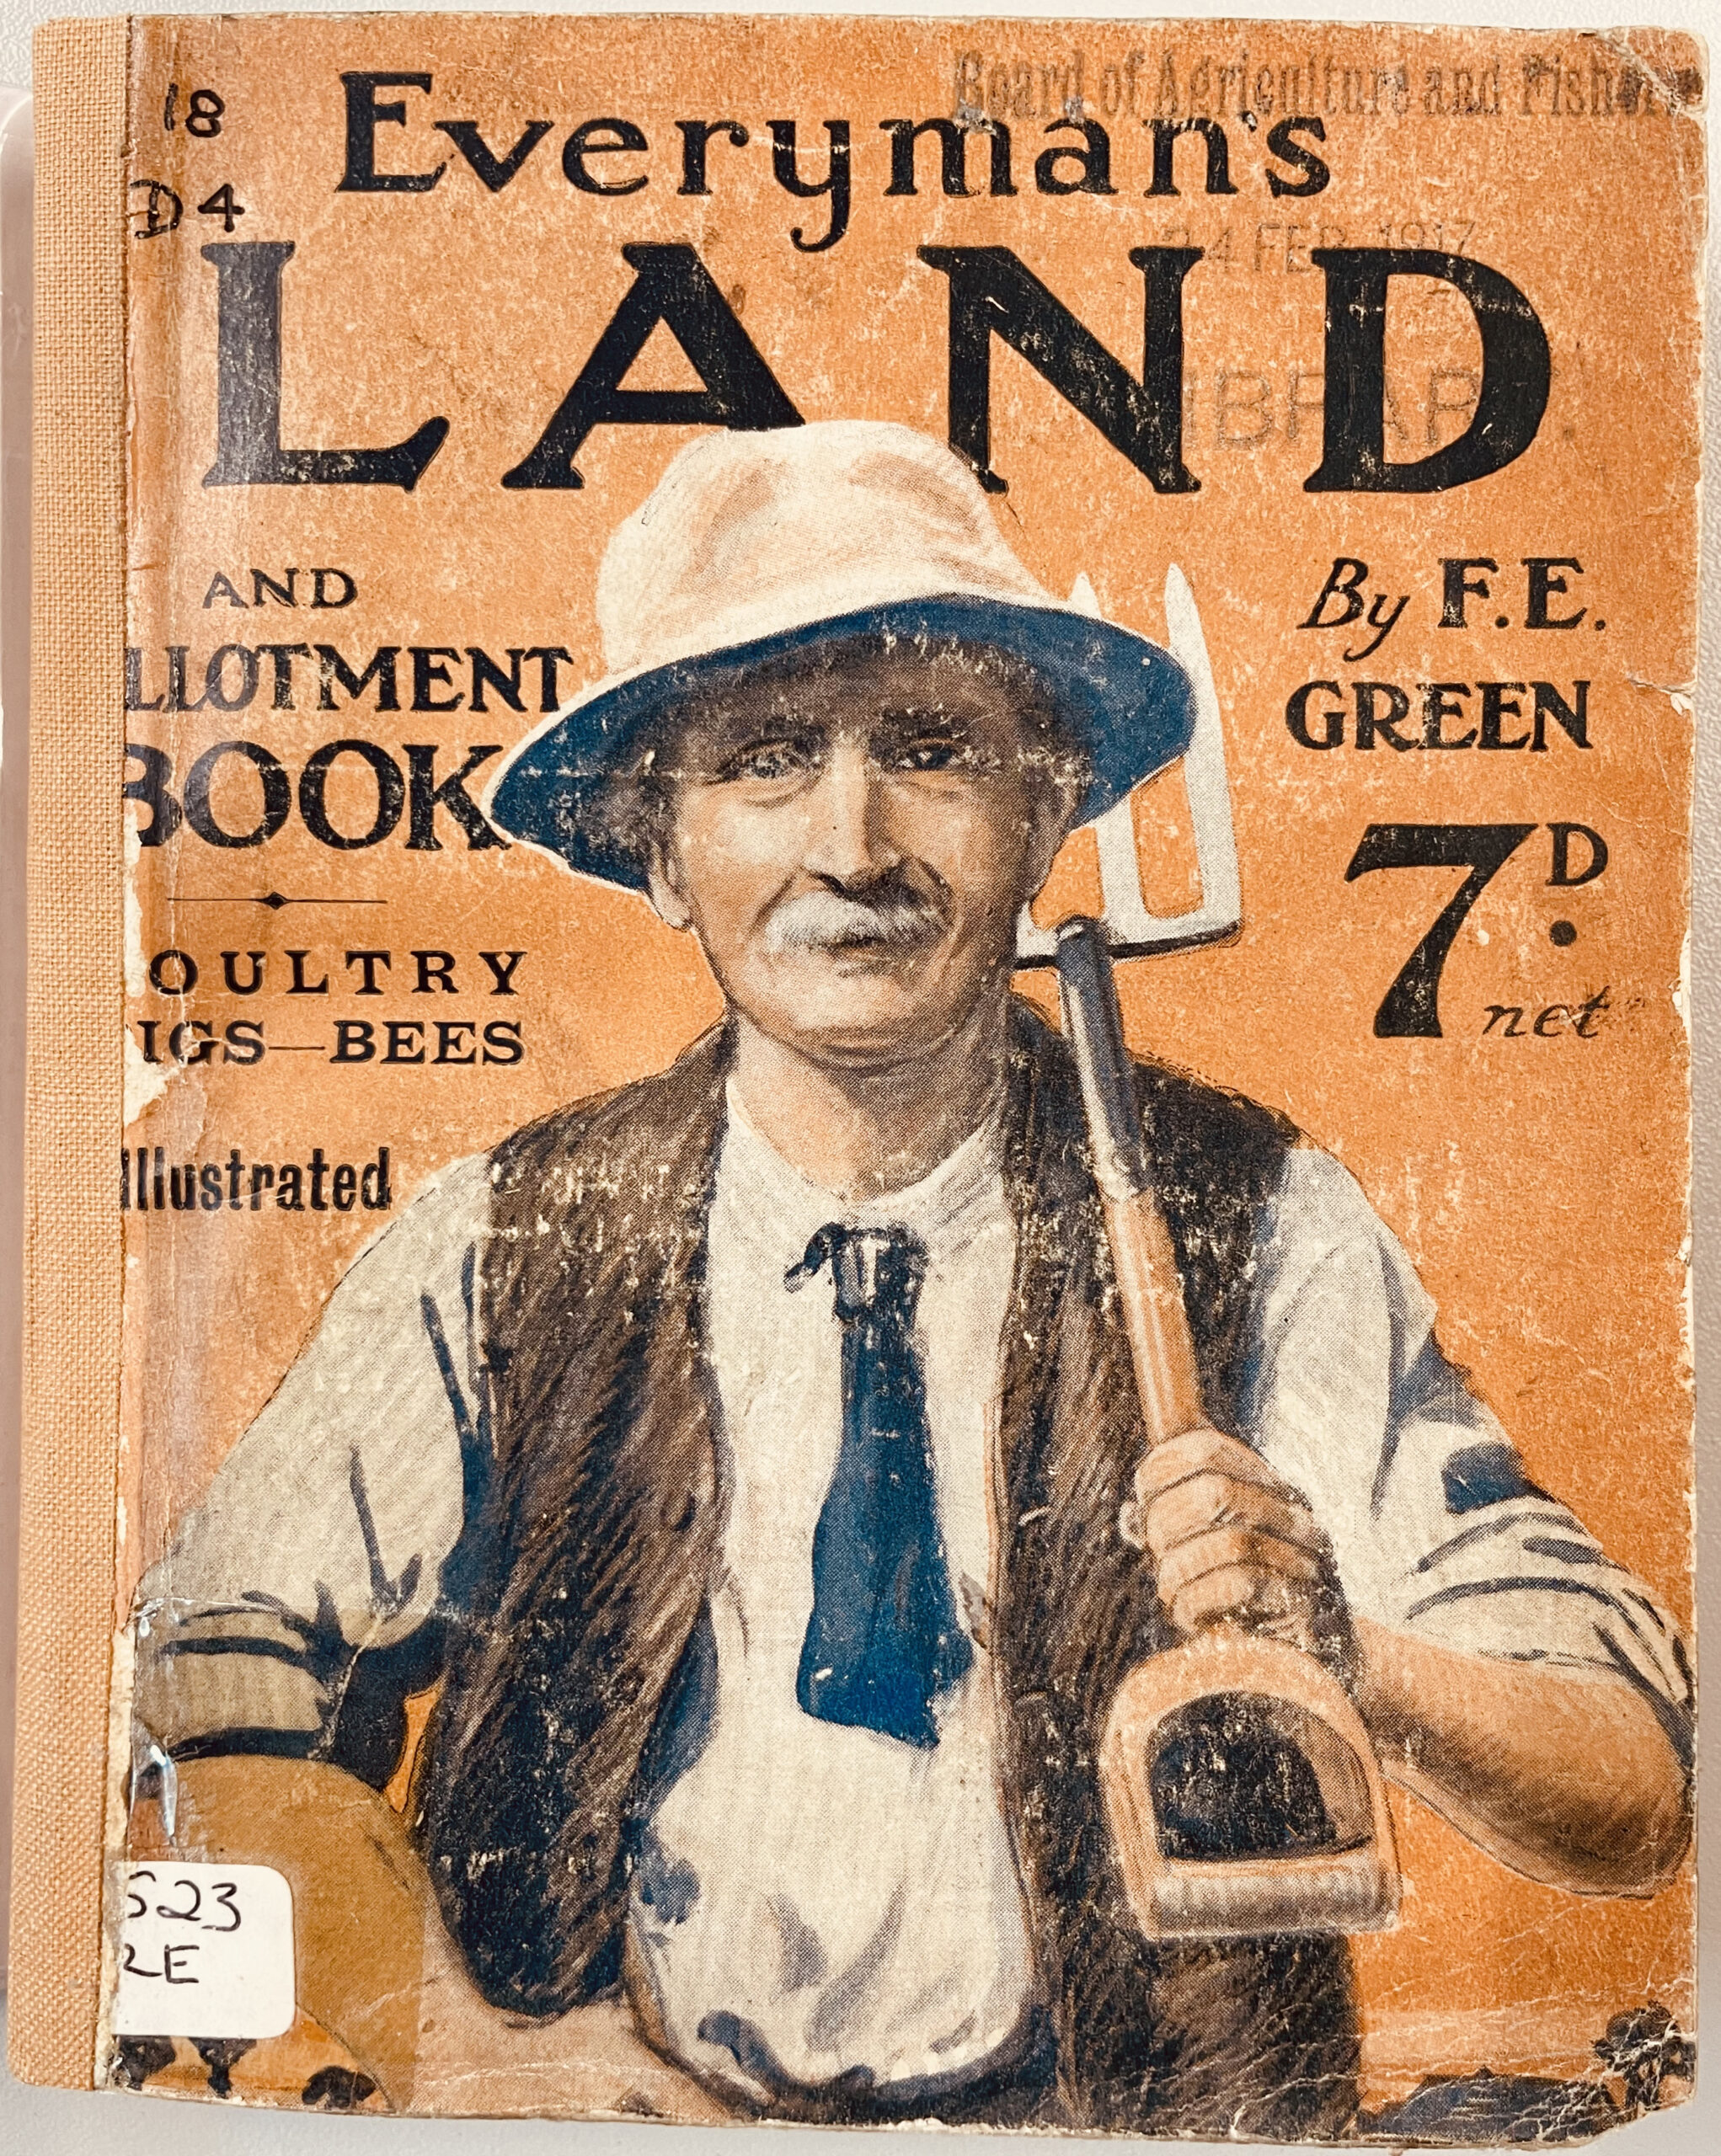 F.E. Green, Everyman’s Land and Allotment Book, (1917). Courtesy of Museum of English Rural Life. MERL LIB - 3523.